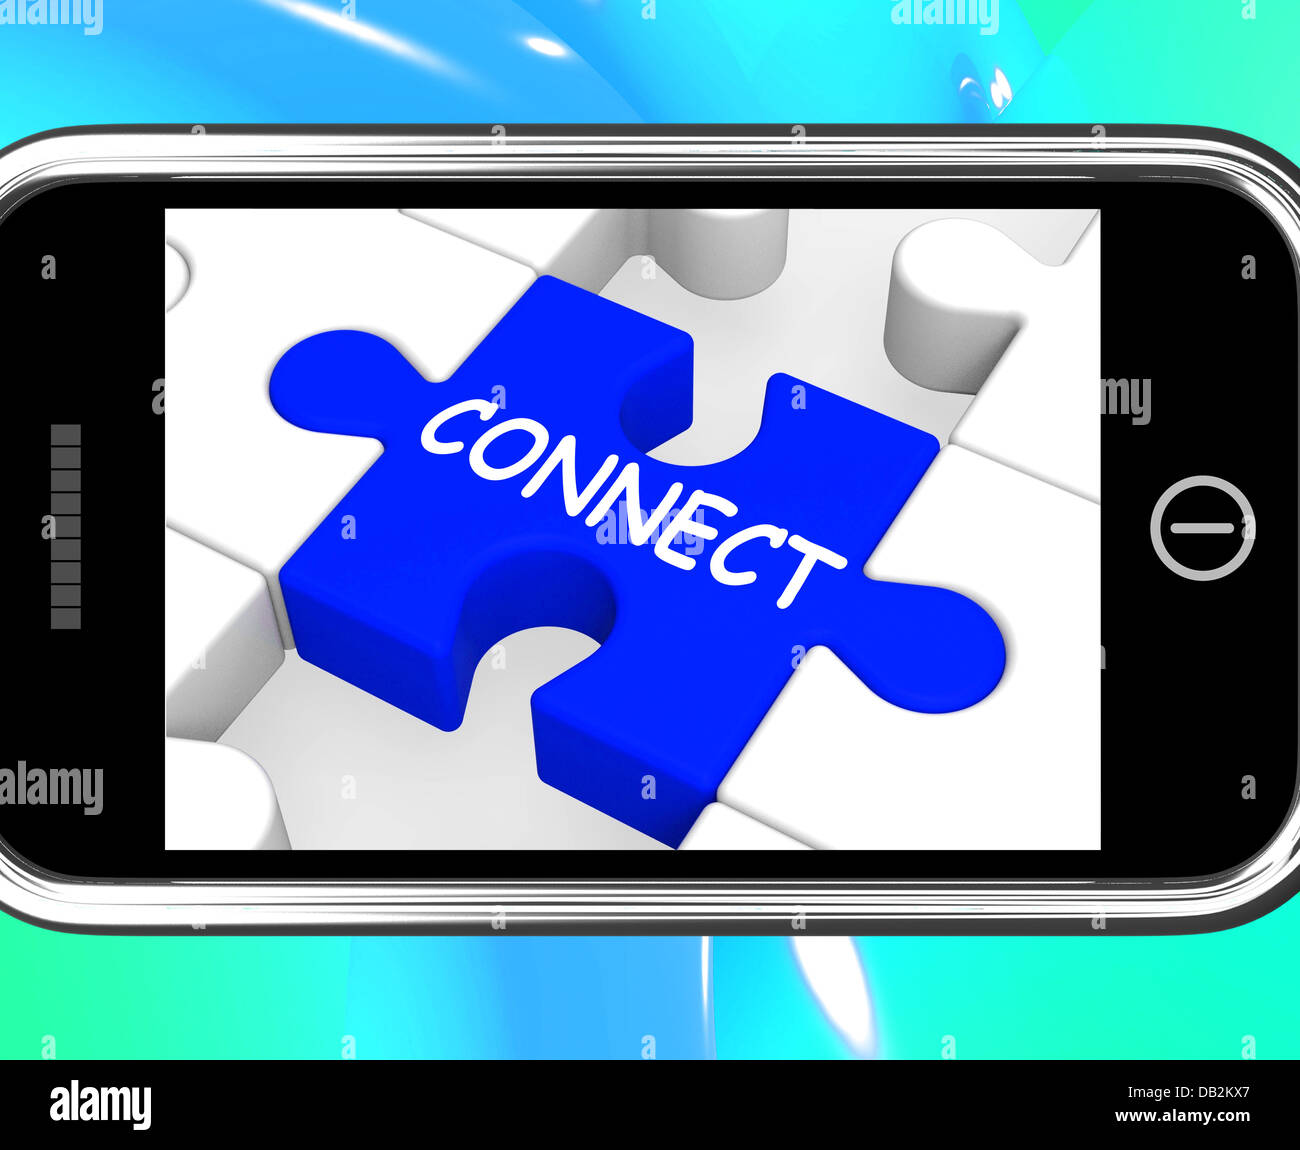 Connect On Smartphone Showing Connected People Stock Photo